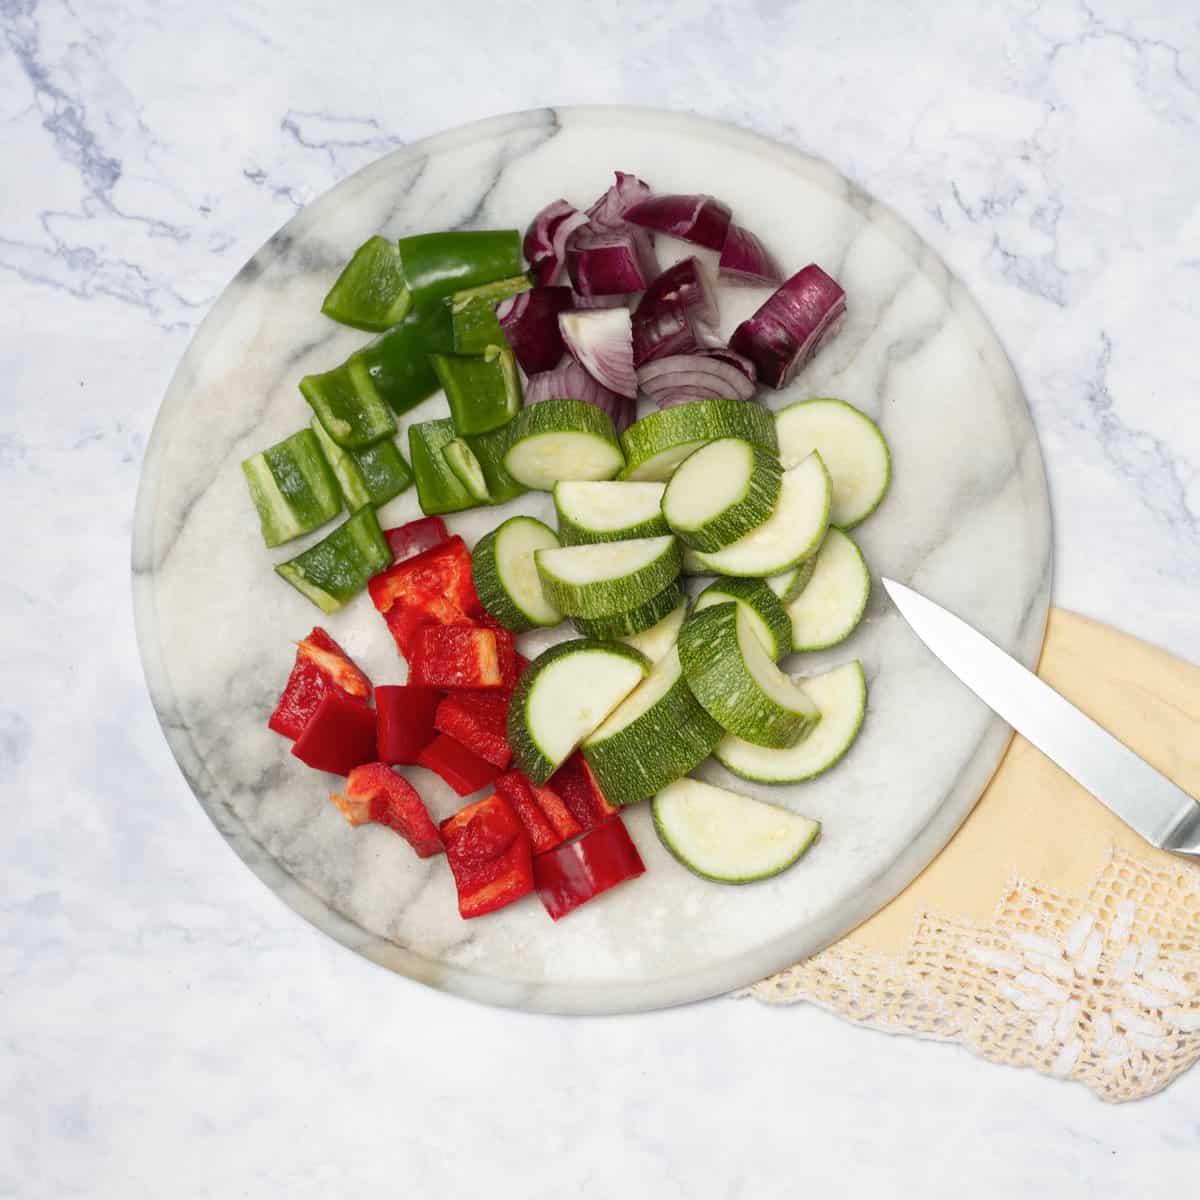 chop the peppers, zucchini, and onion into pieces